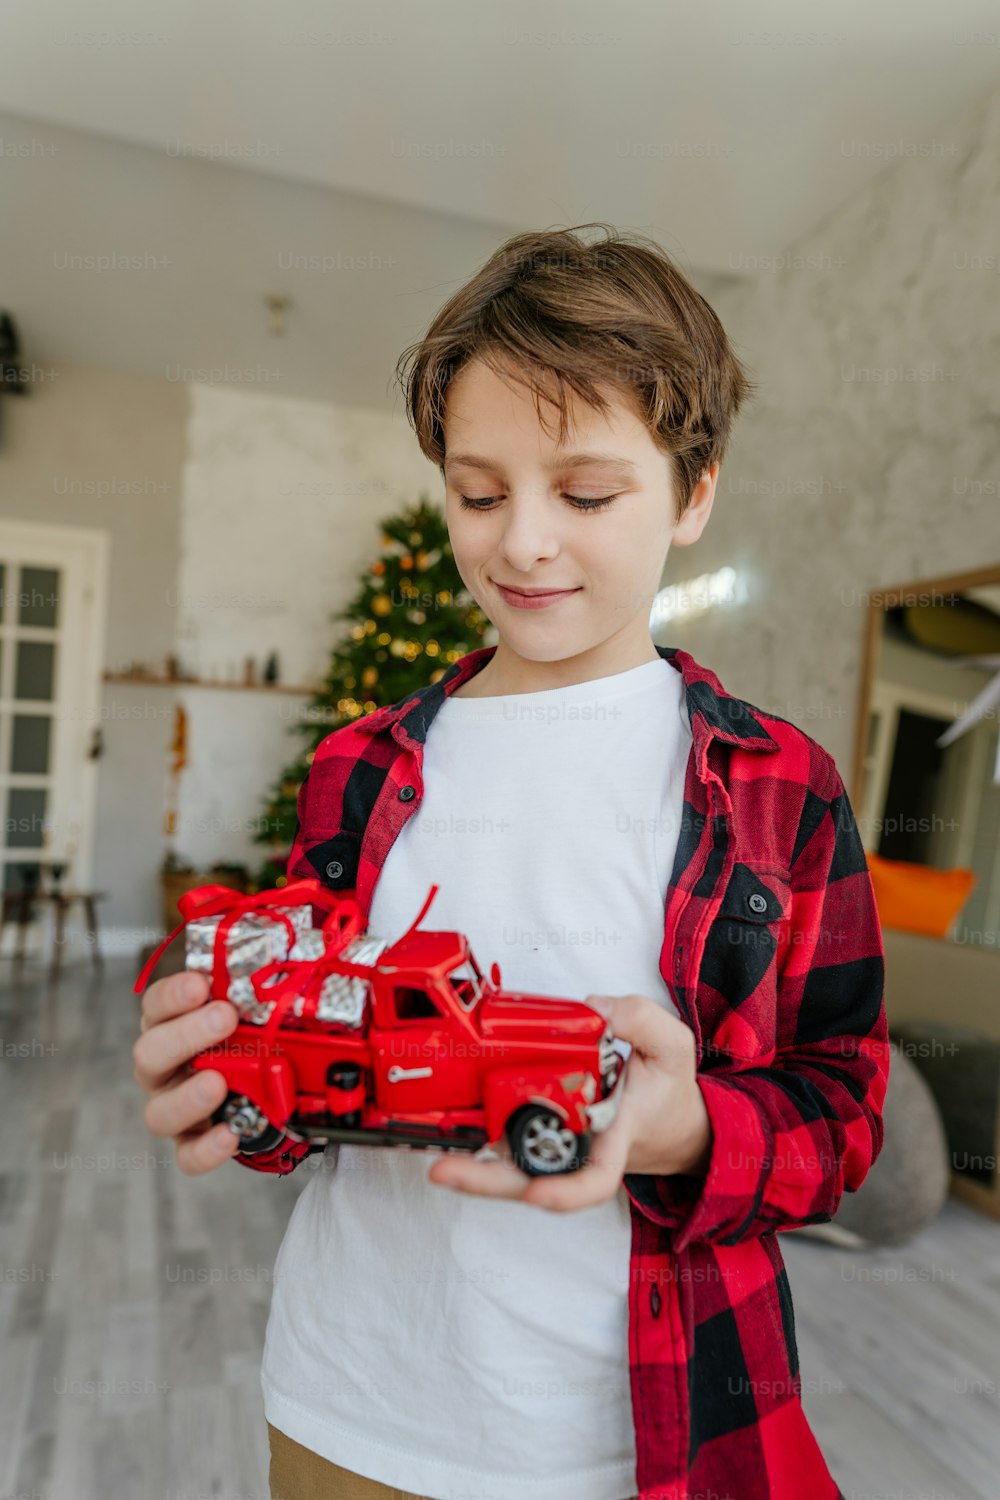 Boy playing with red toy car and Christmas gift boxes.